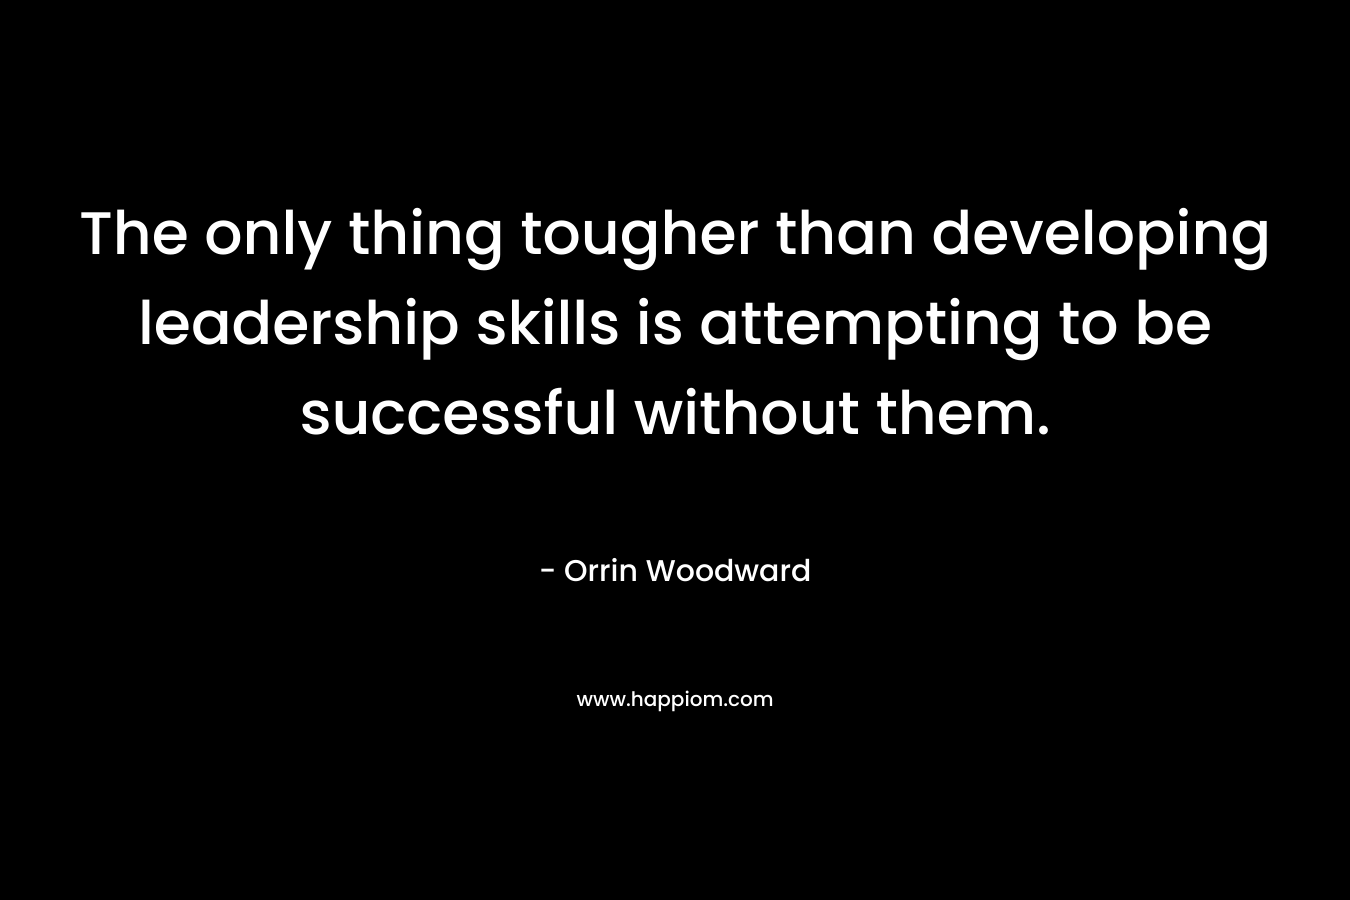 The only thing tougher than developing leadership skills is attempting to be successful without them.